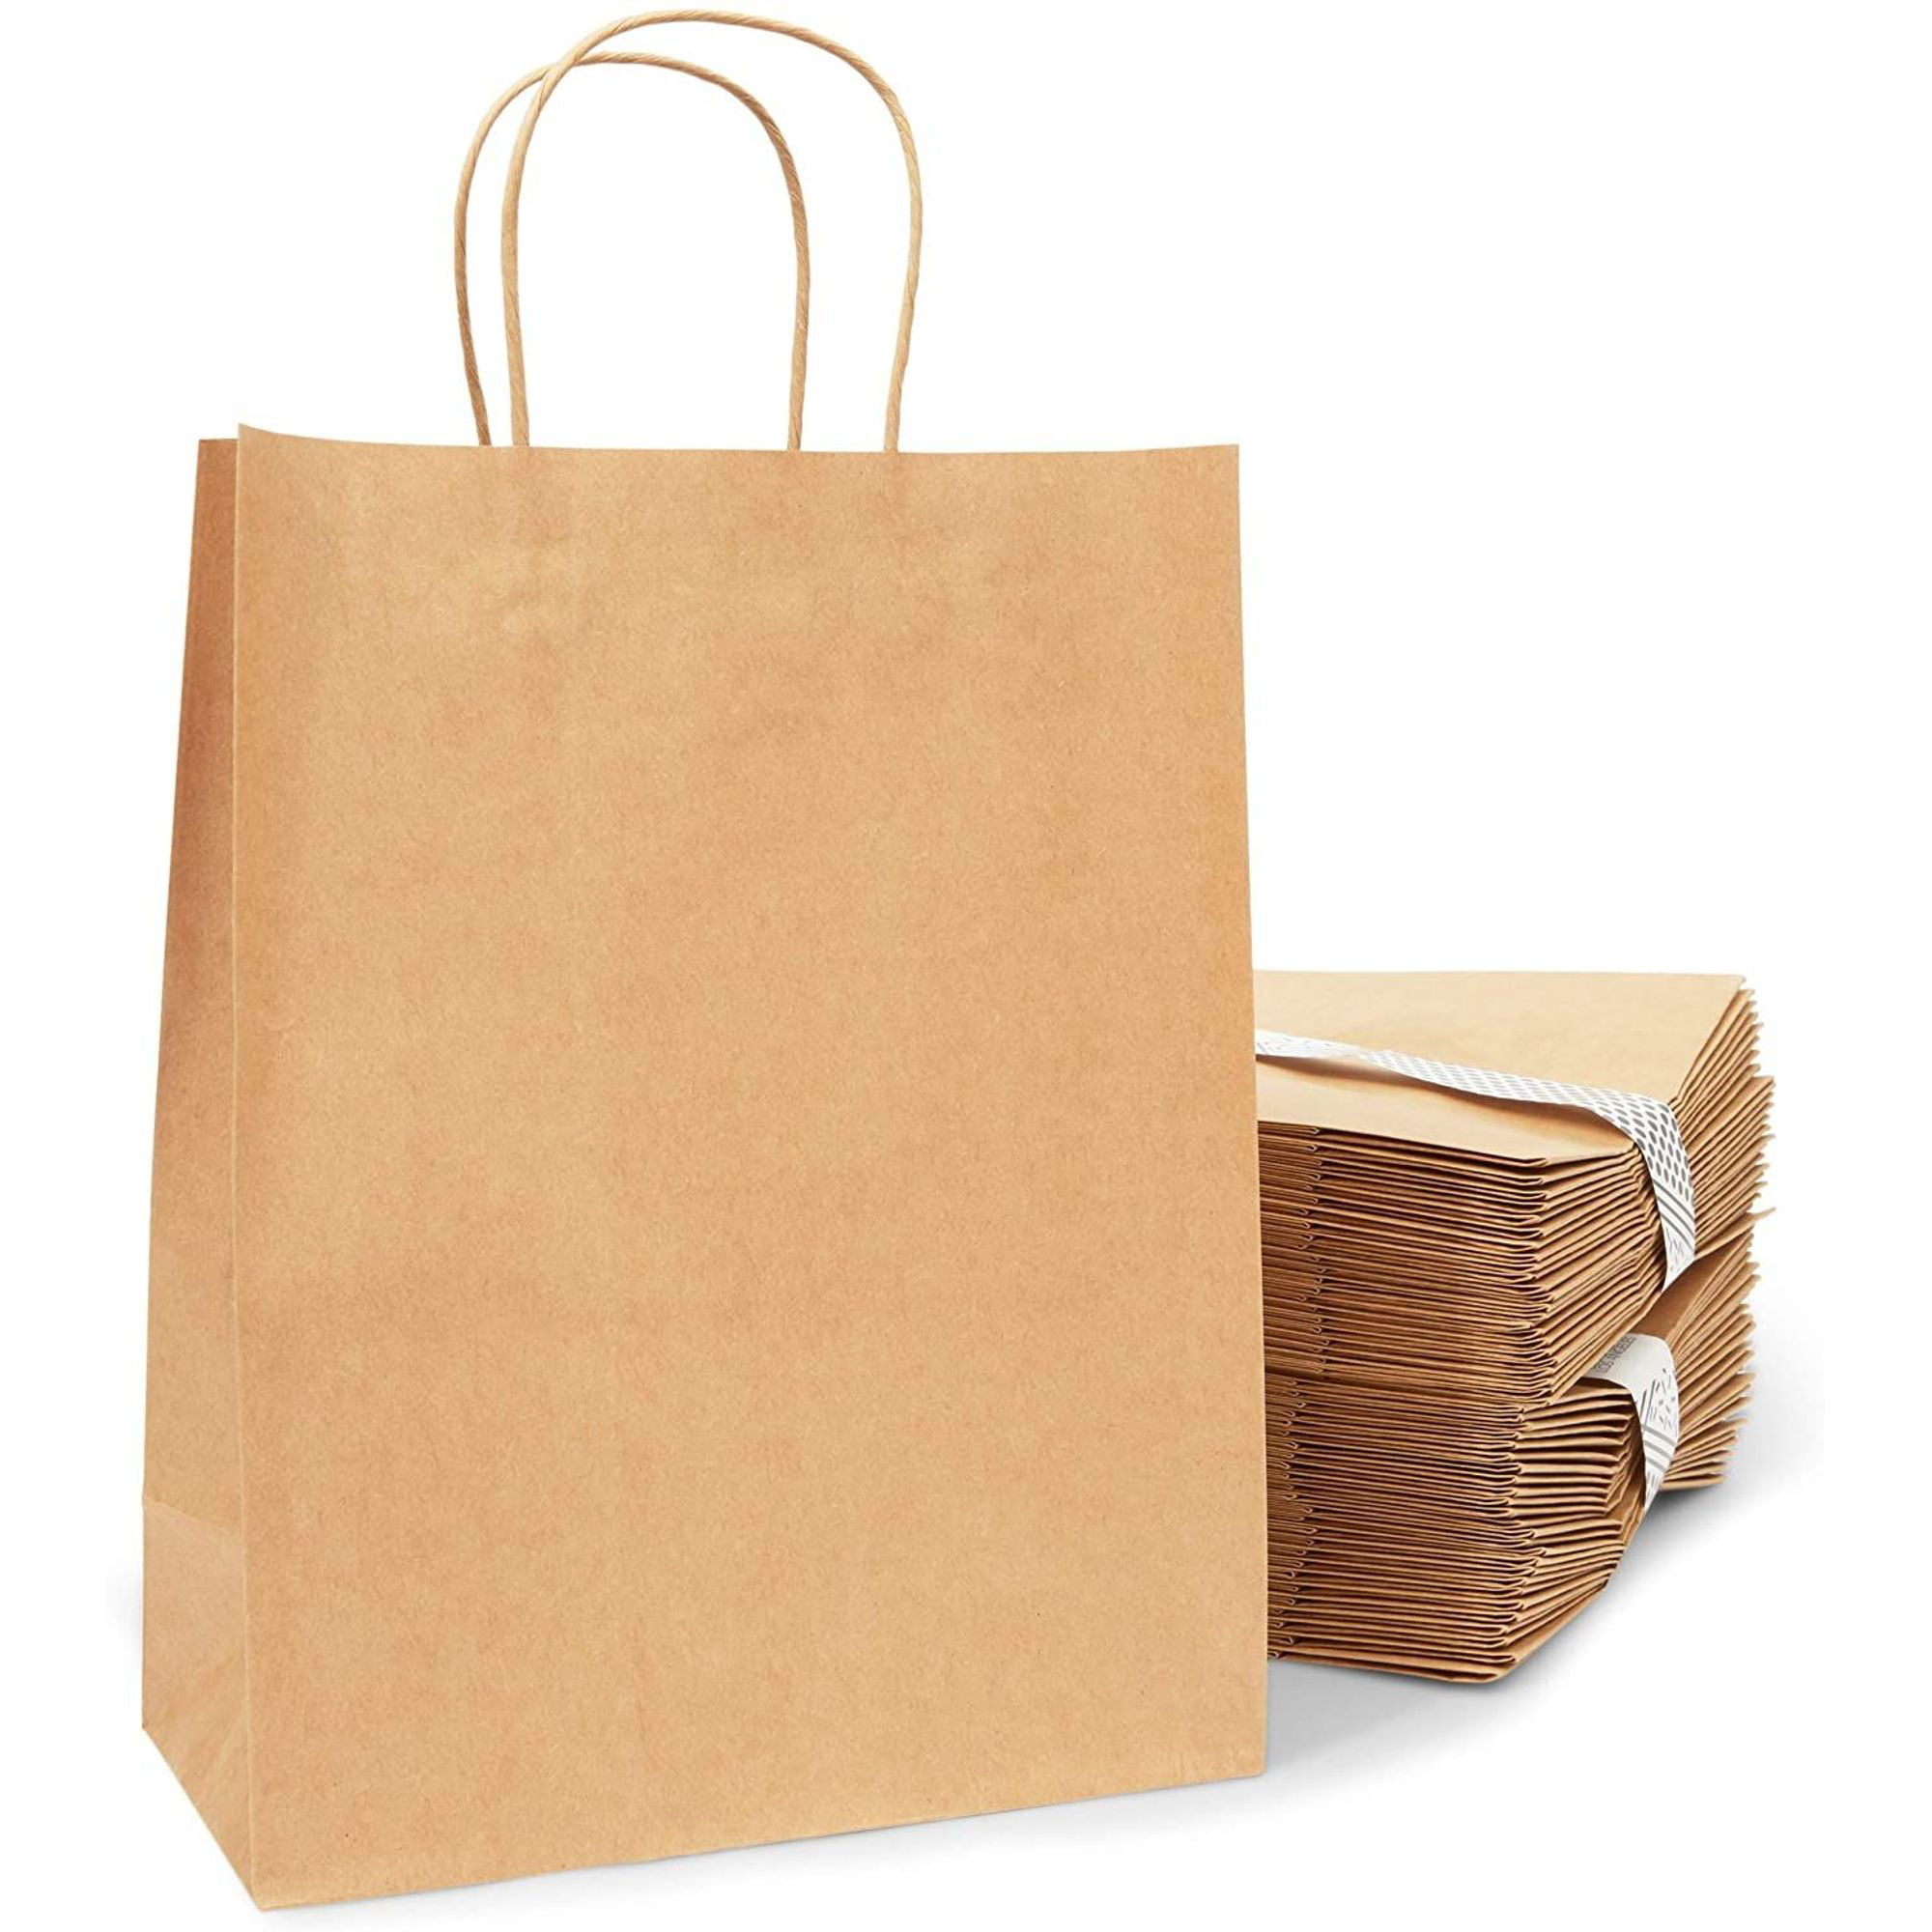 Juvale 50pcs Brown Kraft Paper Gift Bags with Handles for Shopping ...